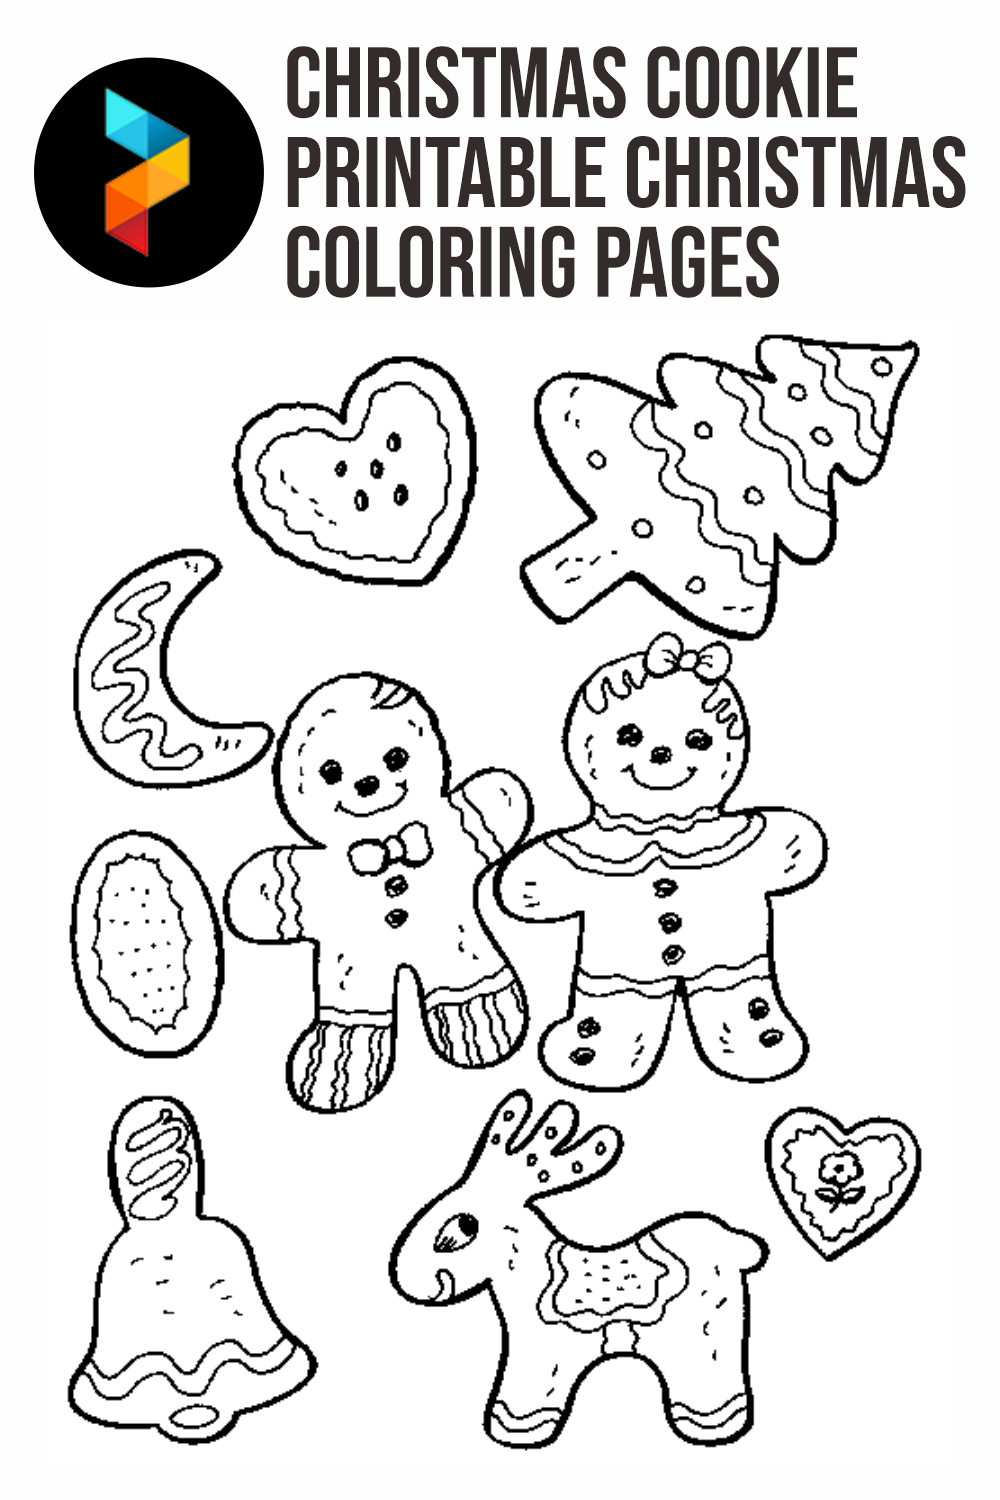 20 Best Christmas Cookie Printable Christmas Coloring Pages ...